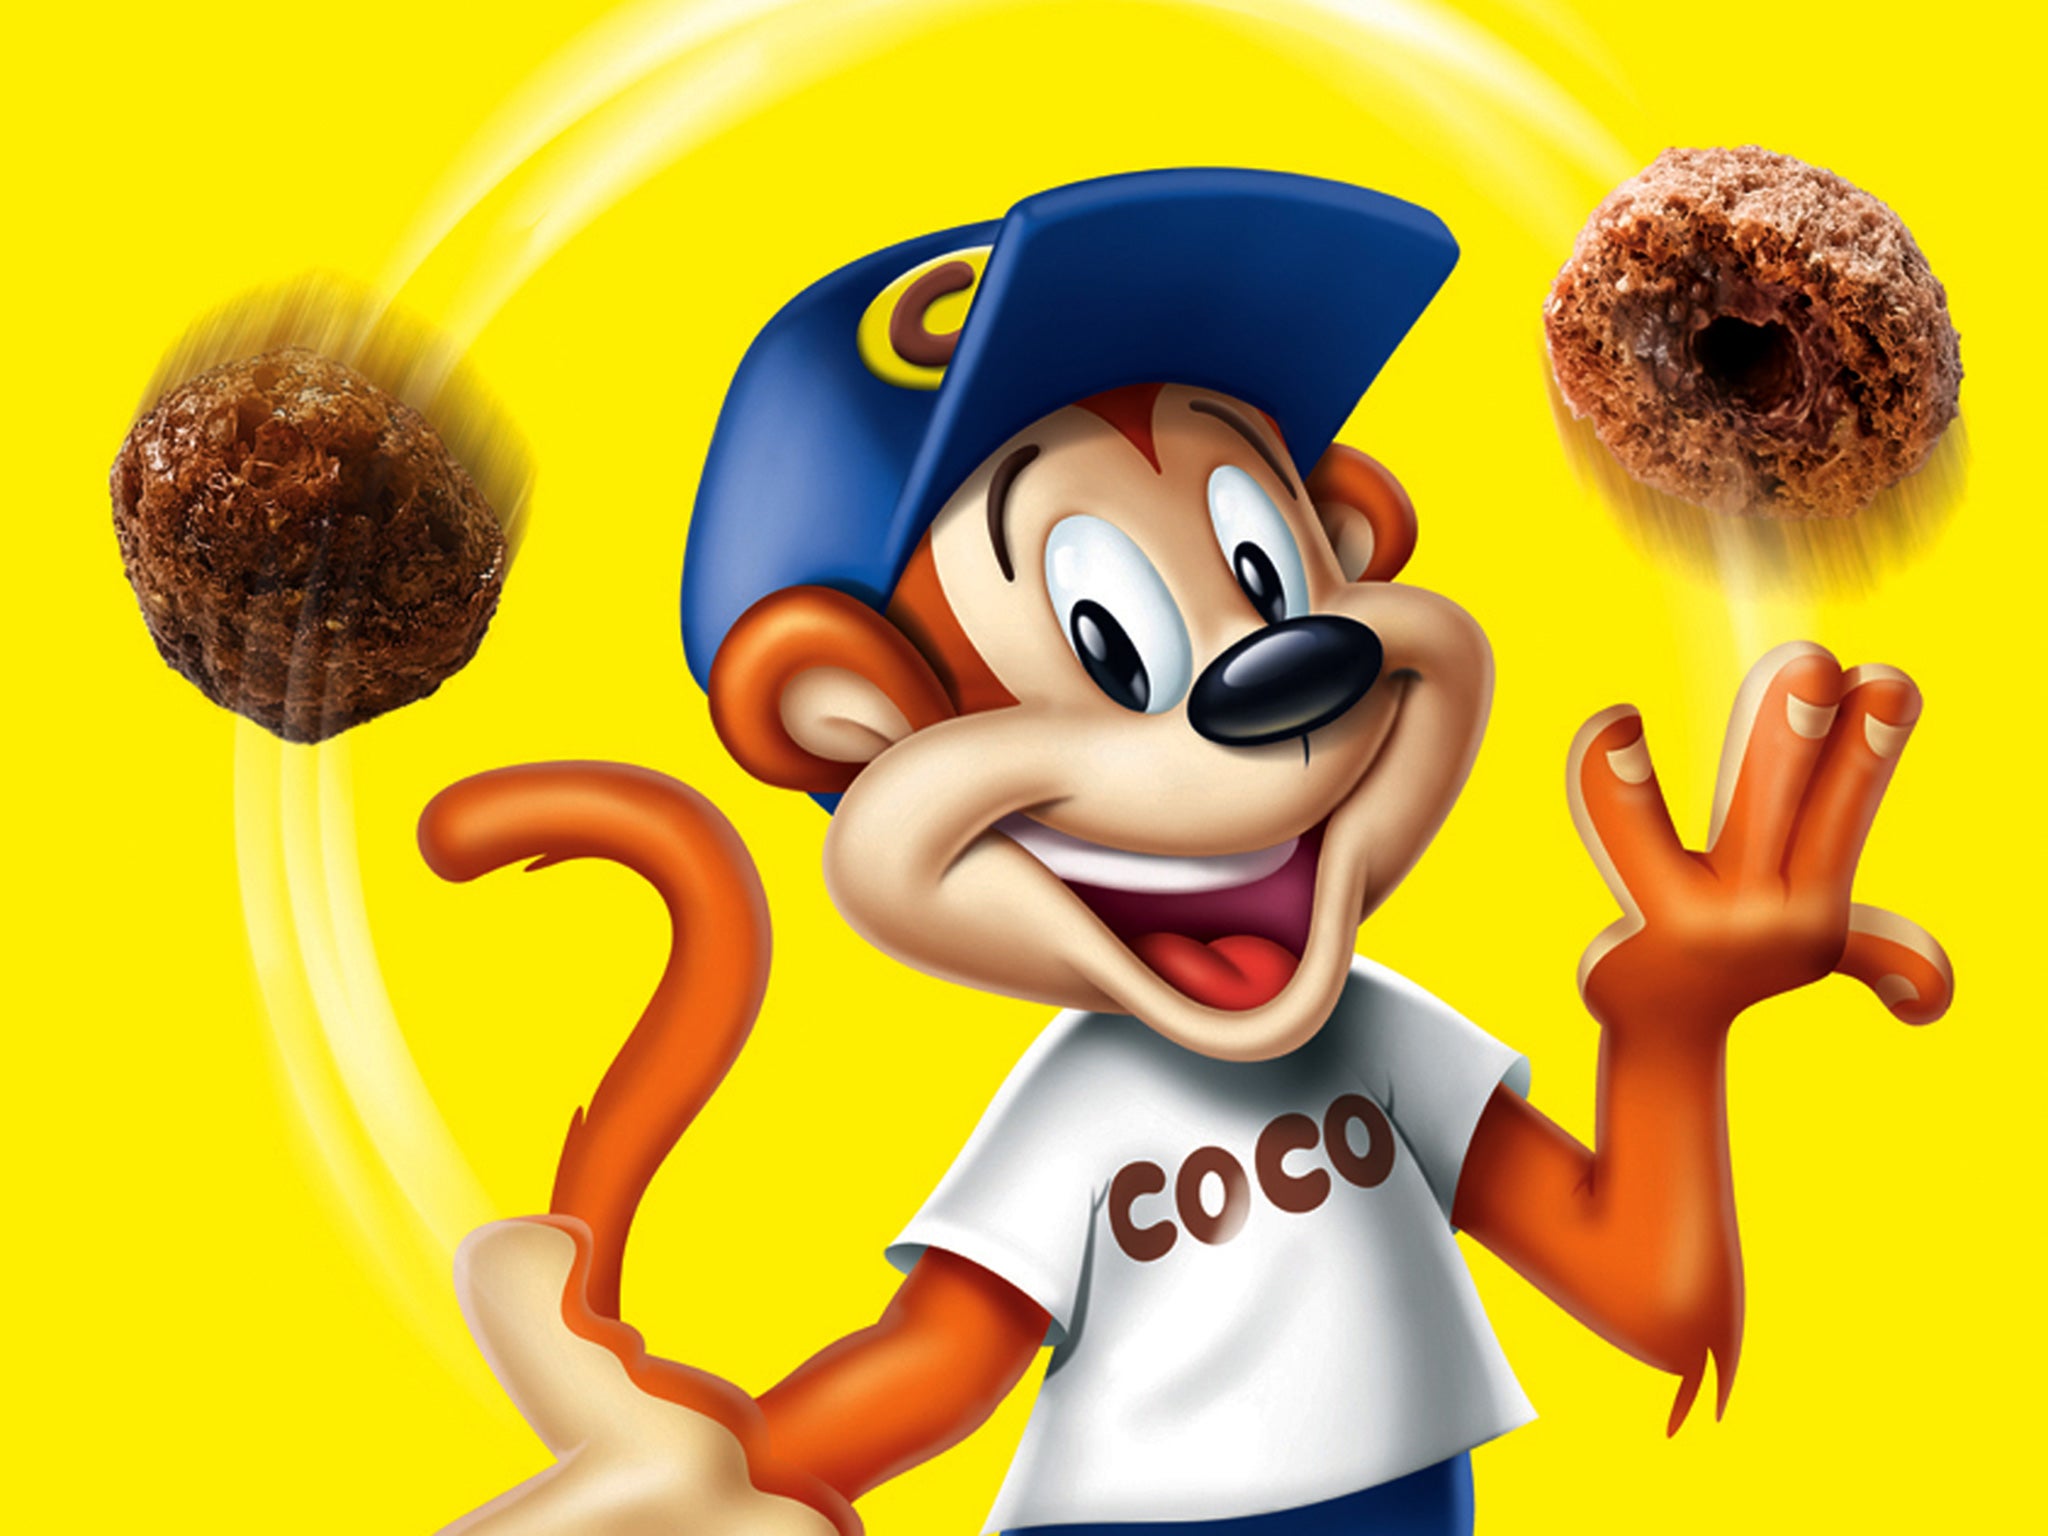 Kellogg’s, which owns Coco Pops, said a change in recipe was the reason behind the weight drop